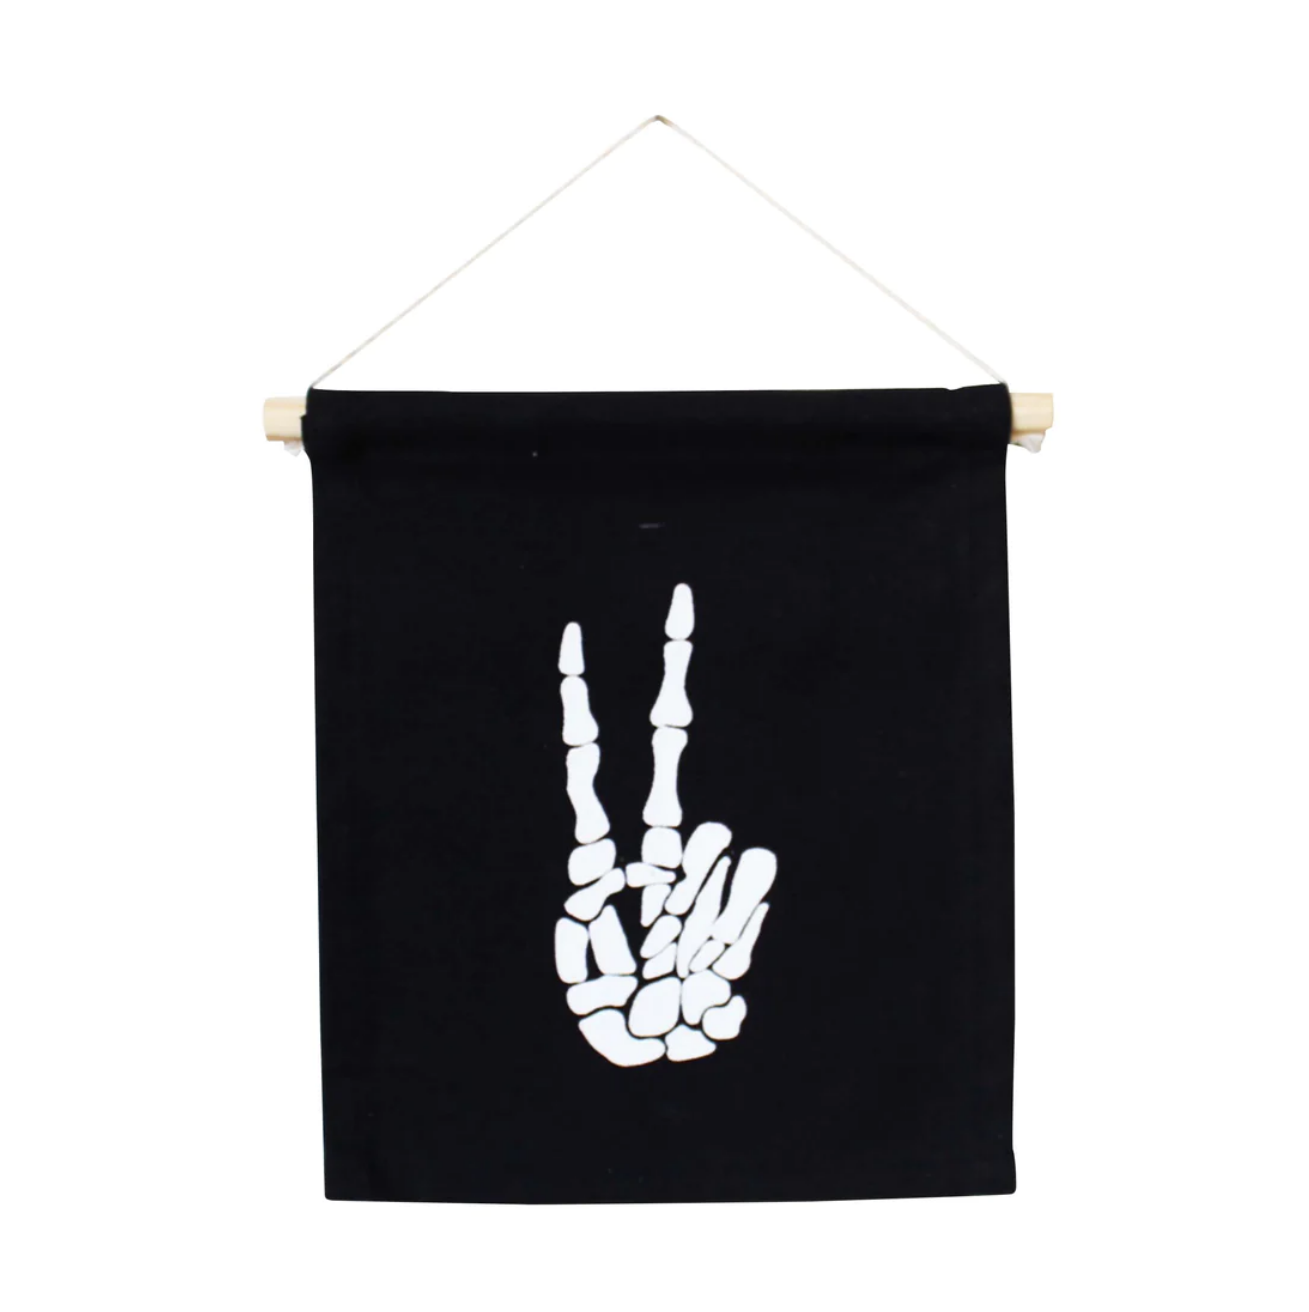 Imani Collective Décor Skeleton Peace Sign - Halloween Hang Sign by Imani Collective Organic Canvas Skeleton Hang Sign - Halloween Decor for Kids | Sustainable Toy Brand